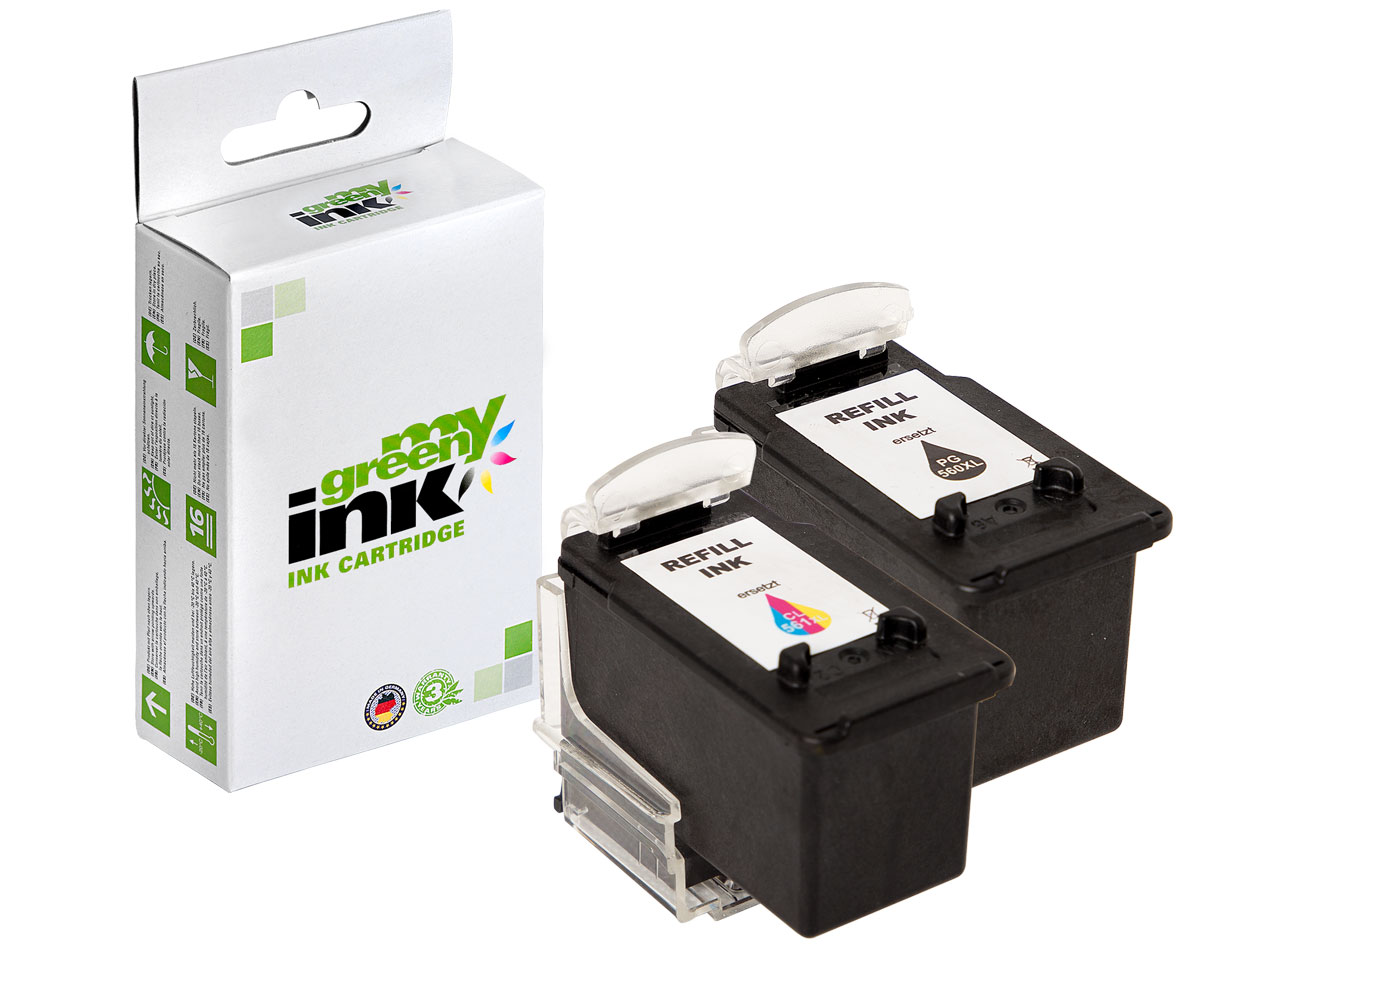 Refill ink cartridge for Canon IP 2850, MG 2450, MX 494 a. o.